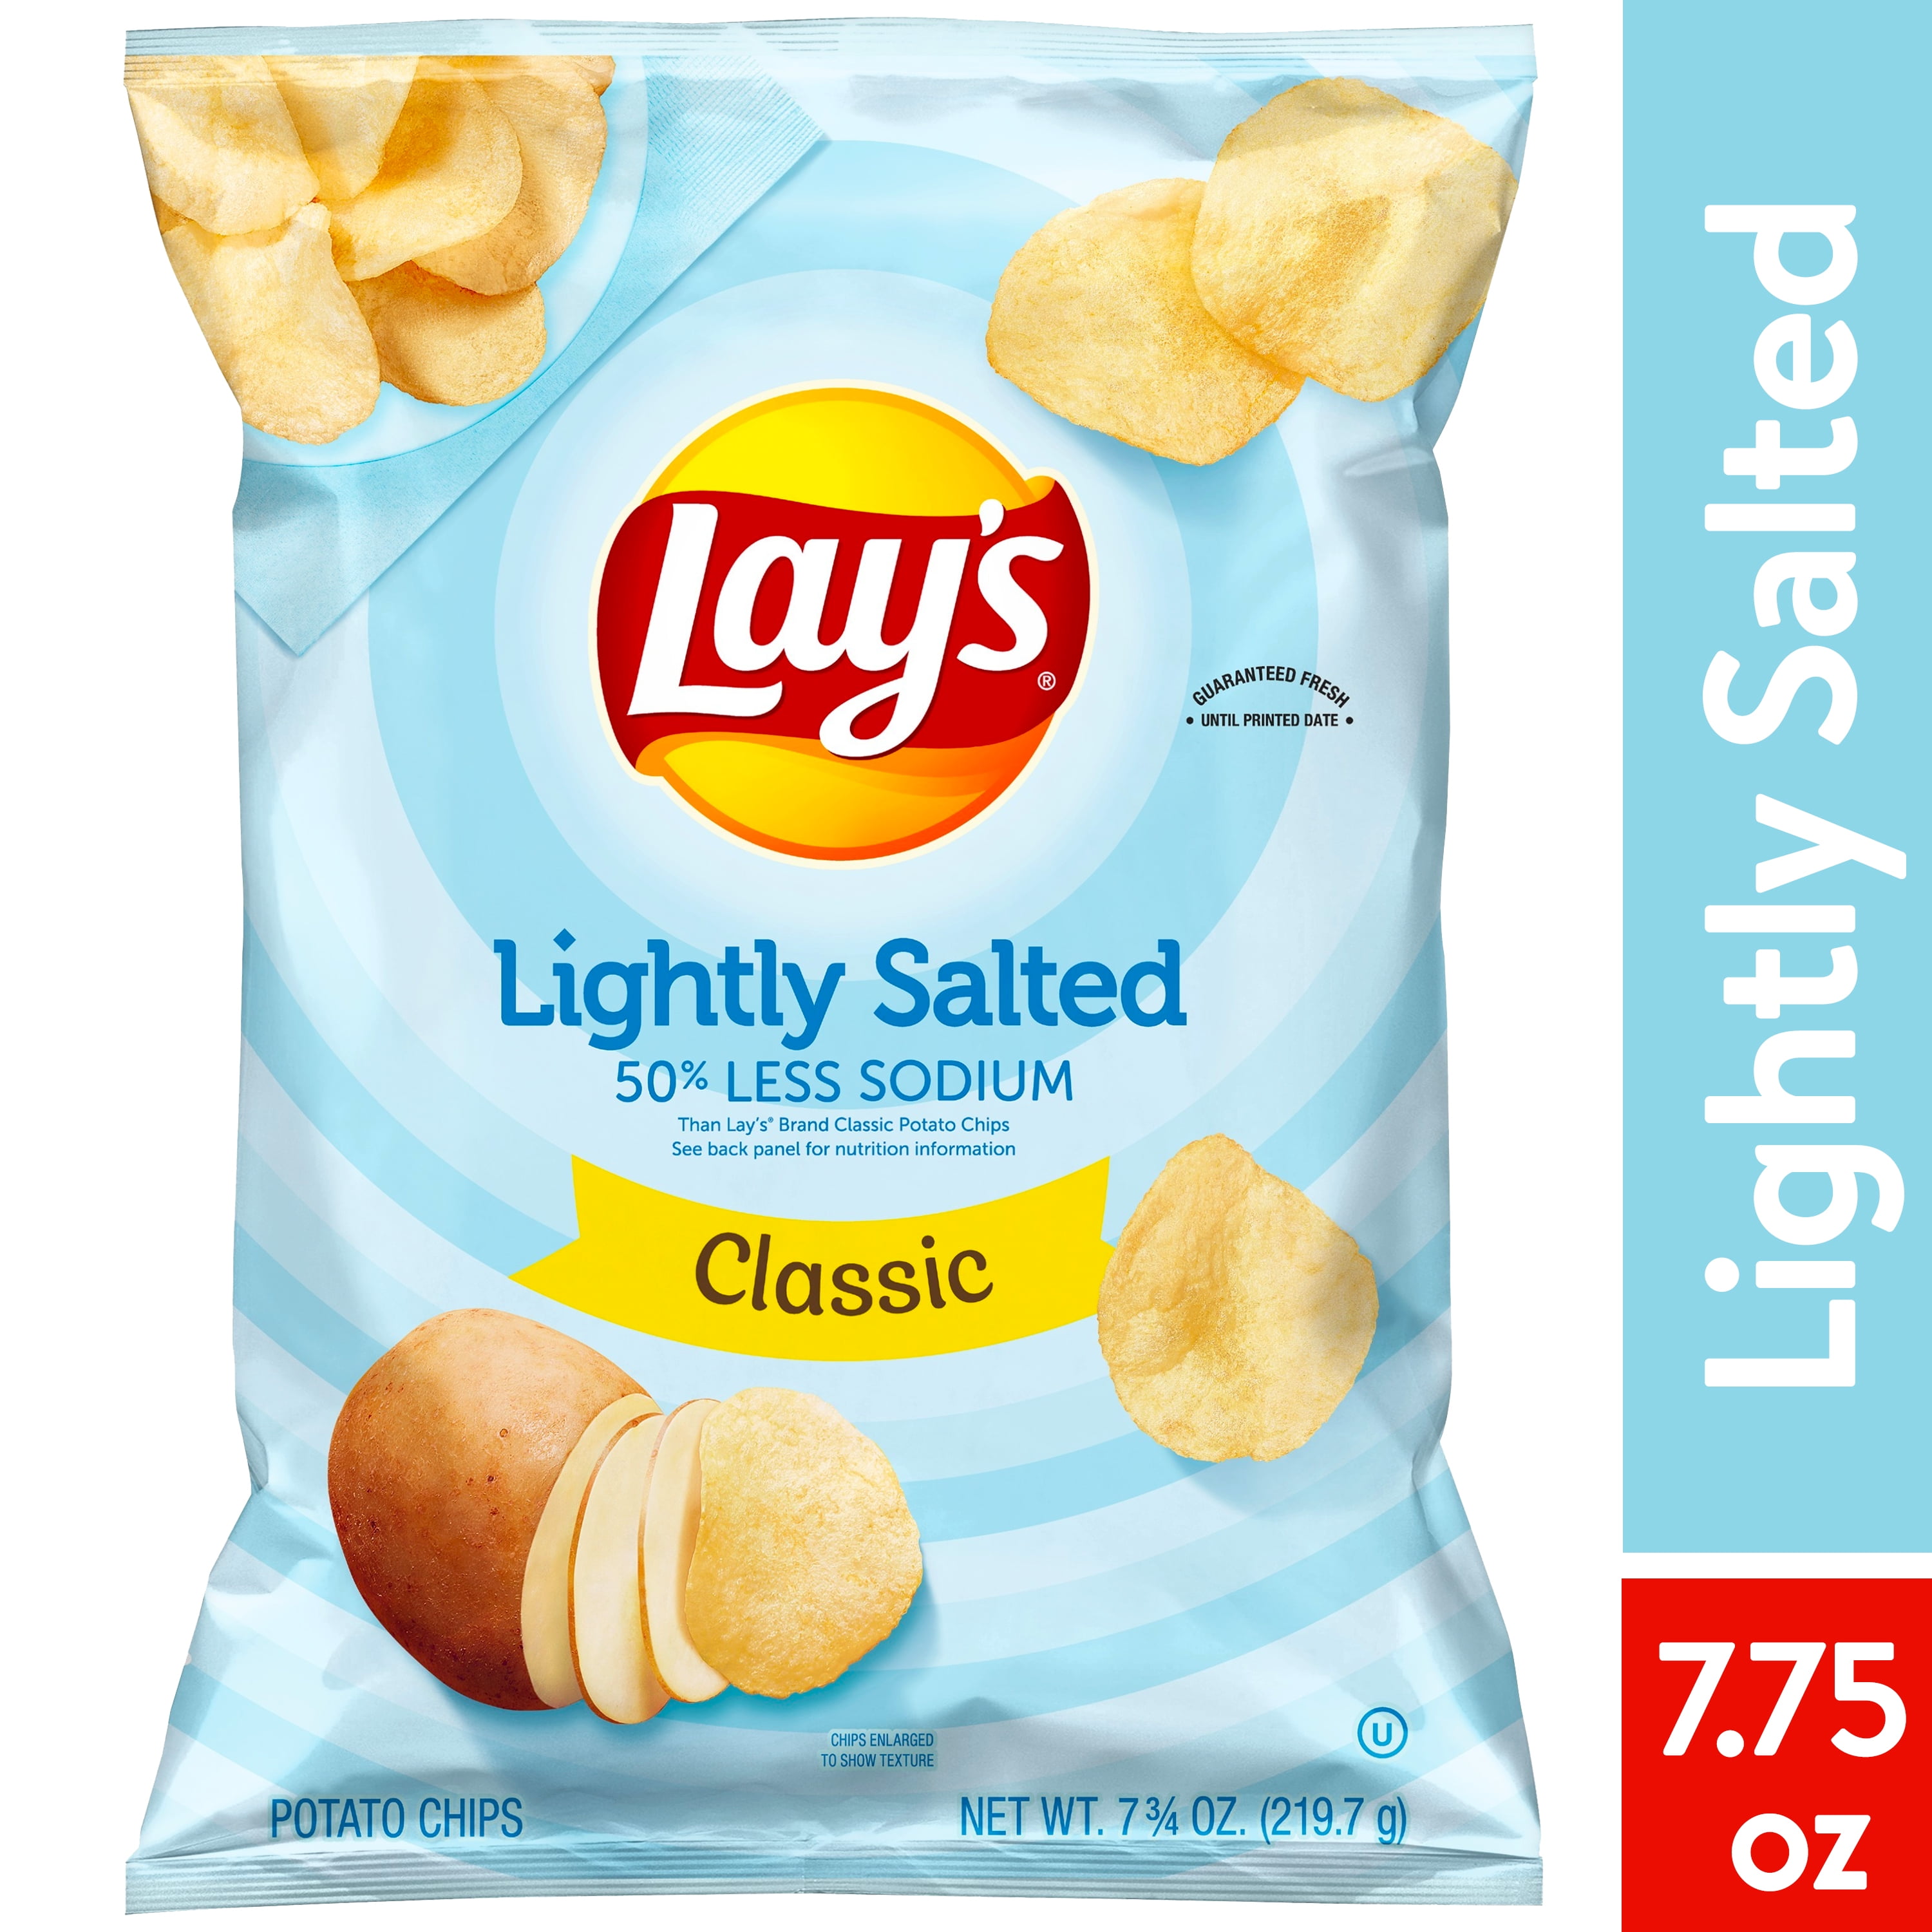 10 Unbelievable Flavors From Lay's Chips